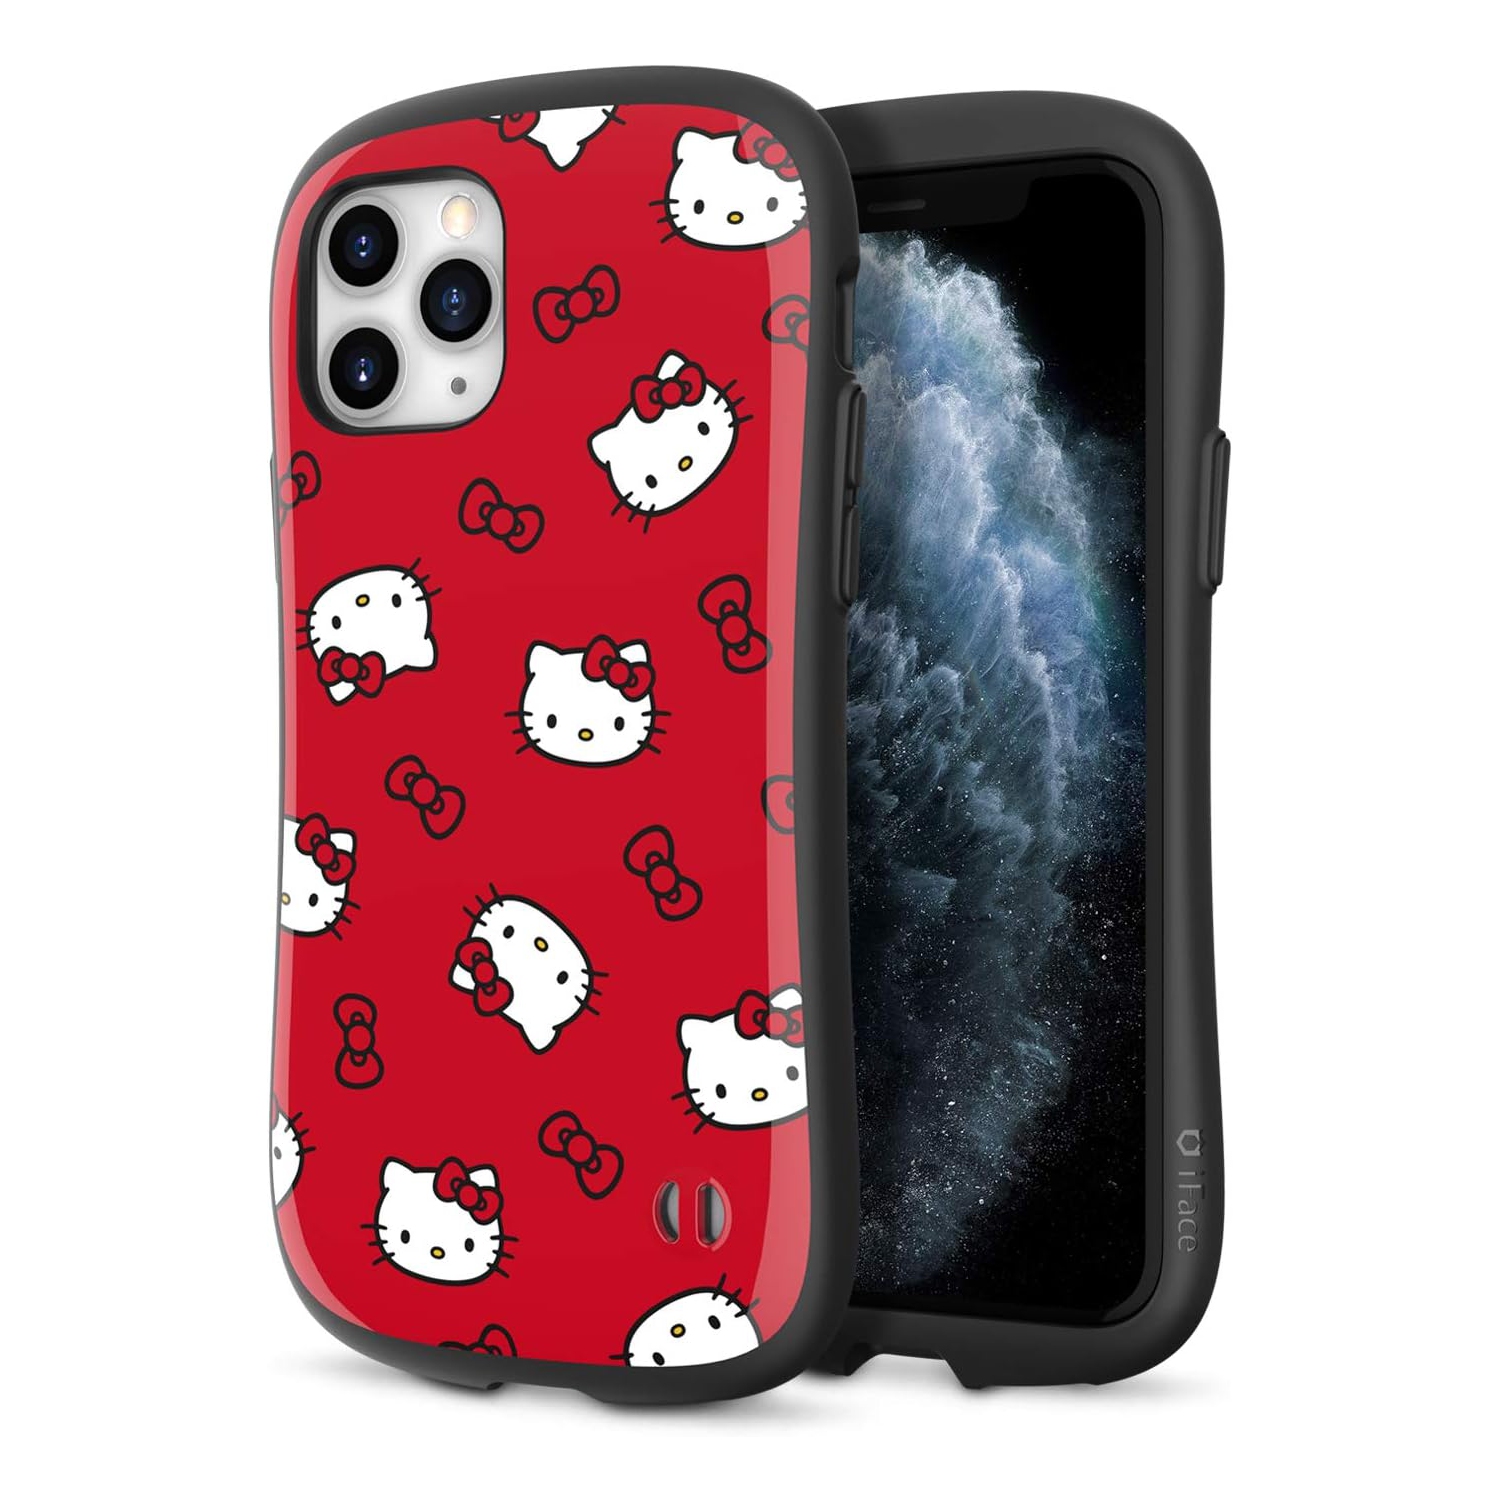 x Sanrio First Class Series iPhone 11 Pro Case – Cute Dual Layer Hybrid Shockproof Protective Cover [Drop Tested]